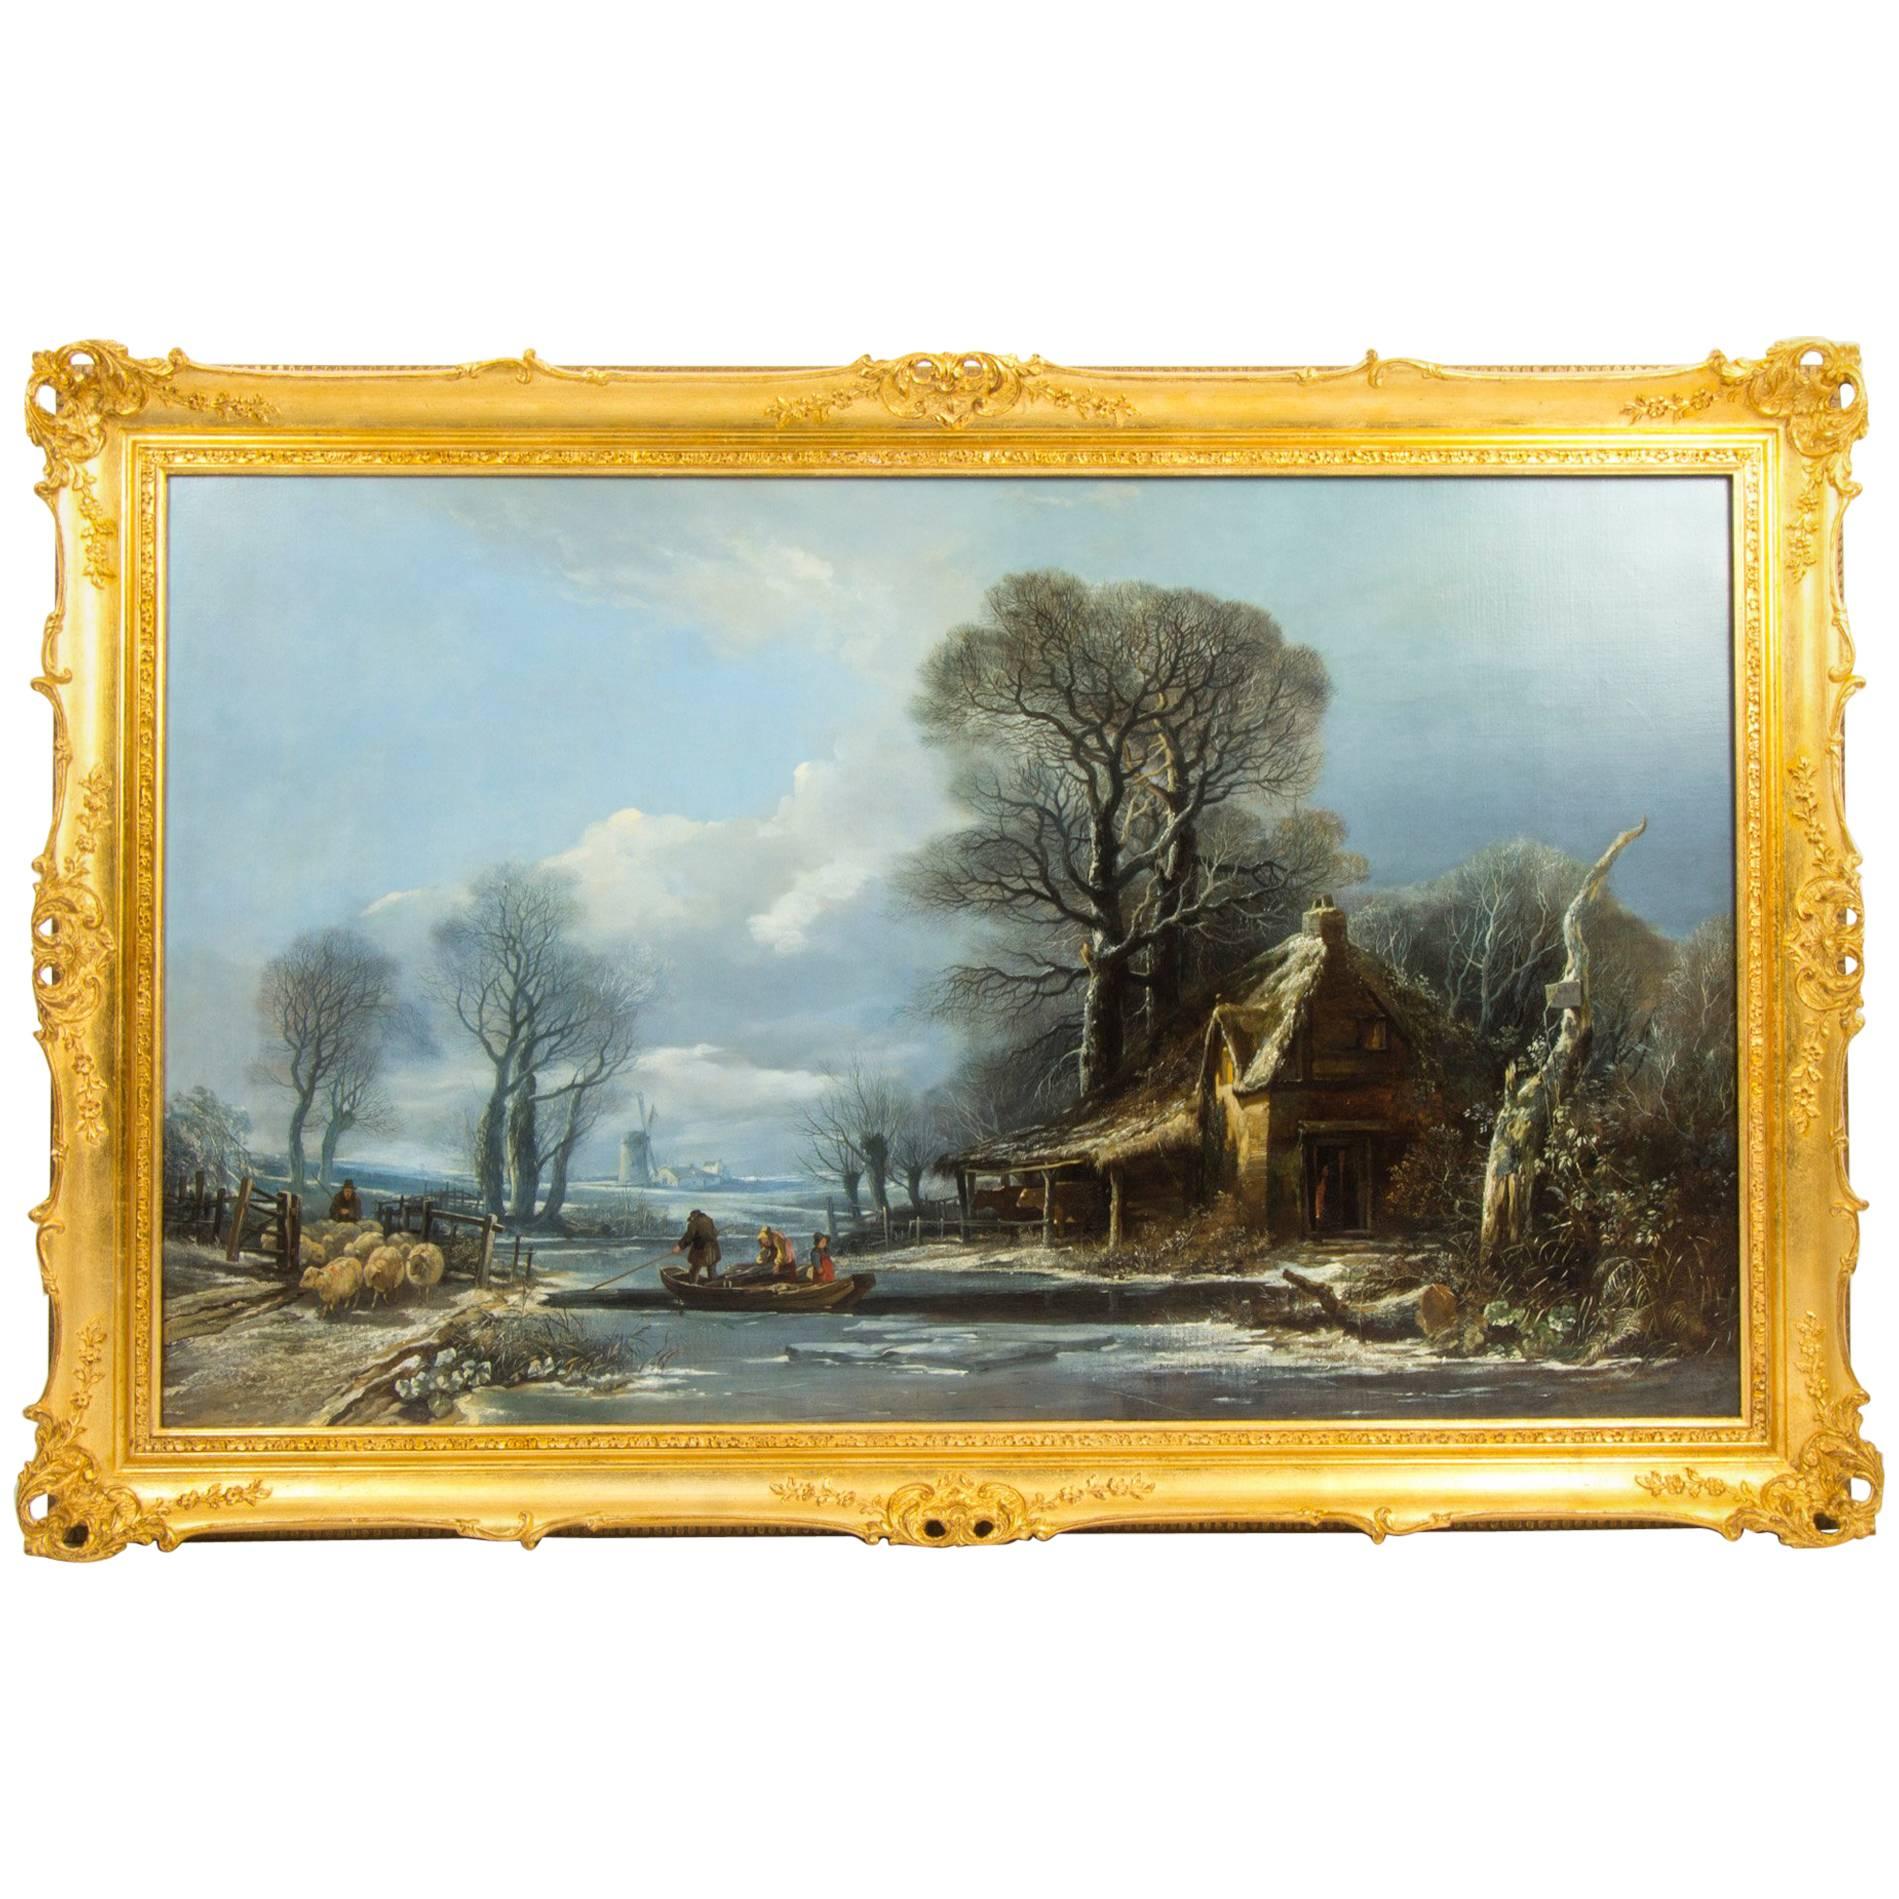 Antique Large Painting Ferry Crossing in a Winter Landscape by H.Muller, 1838